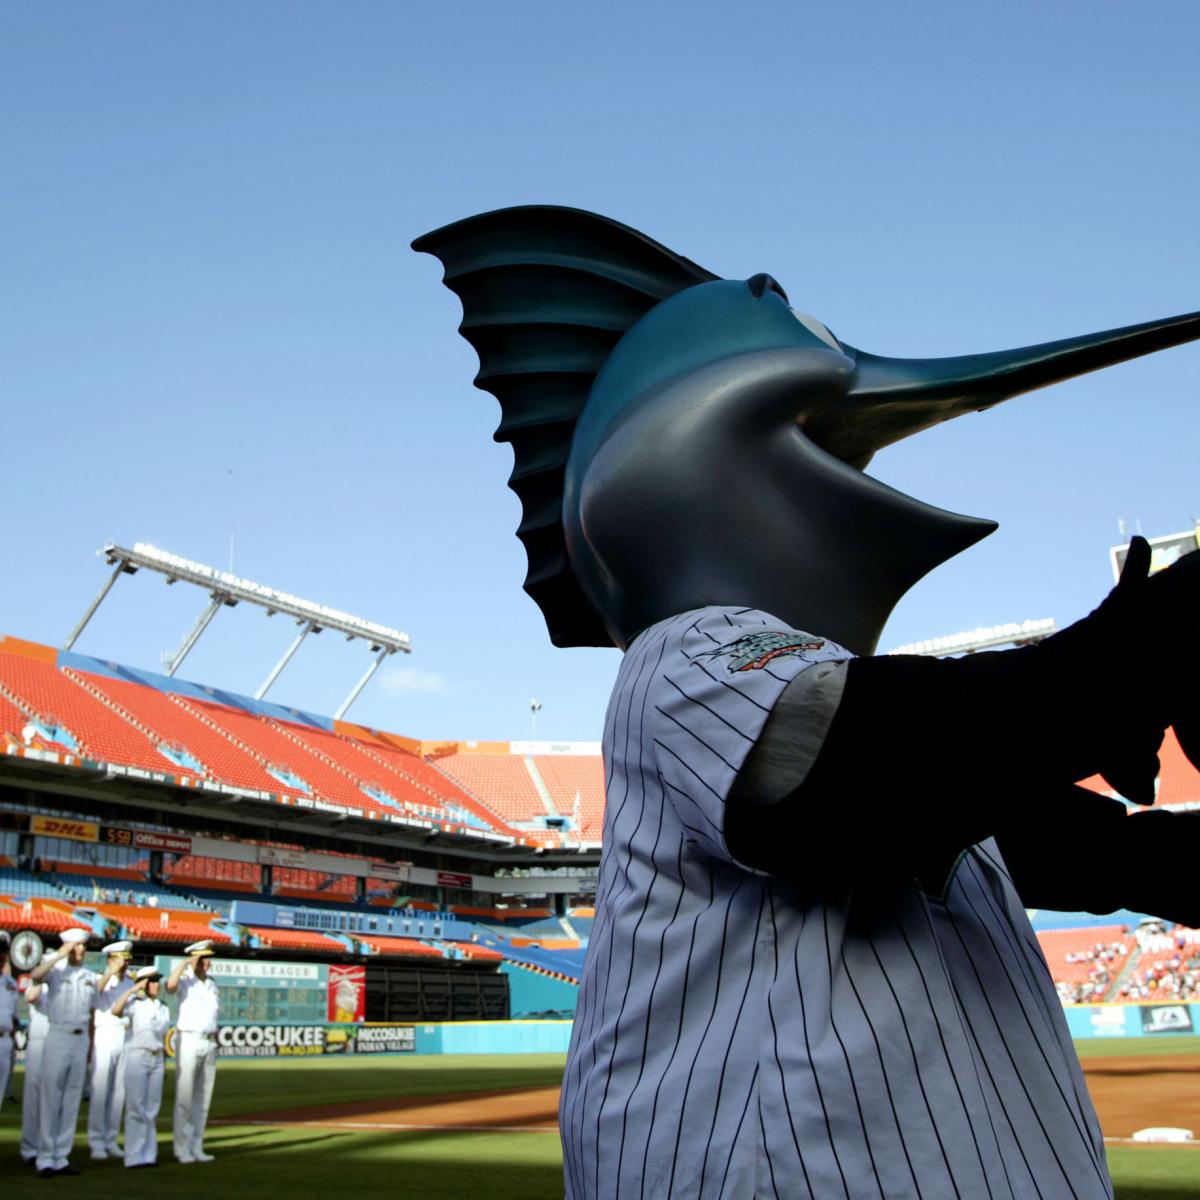 On This Date in Florida / Miami Marlins History: April 2nd